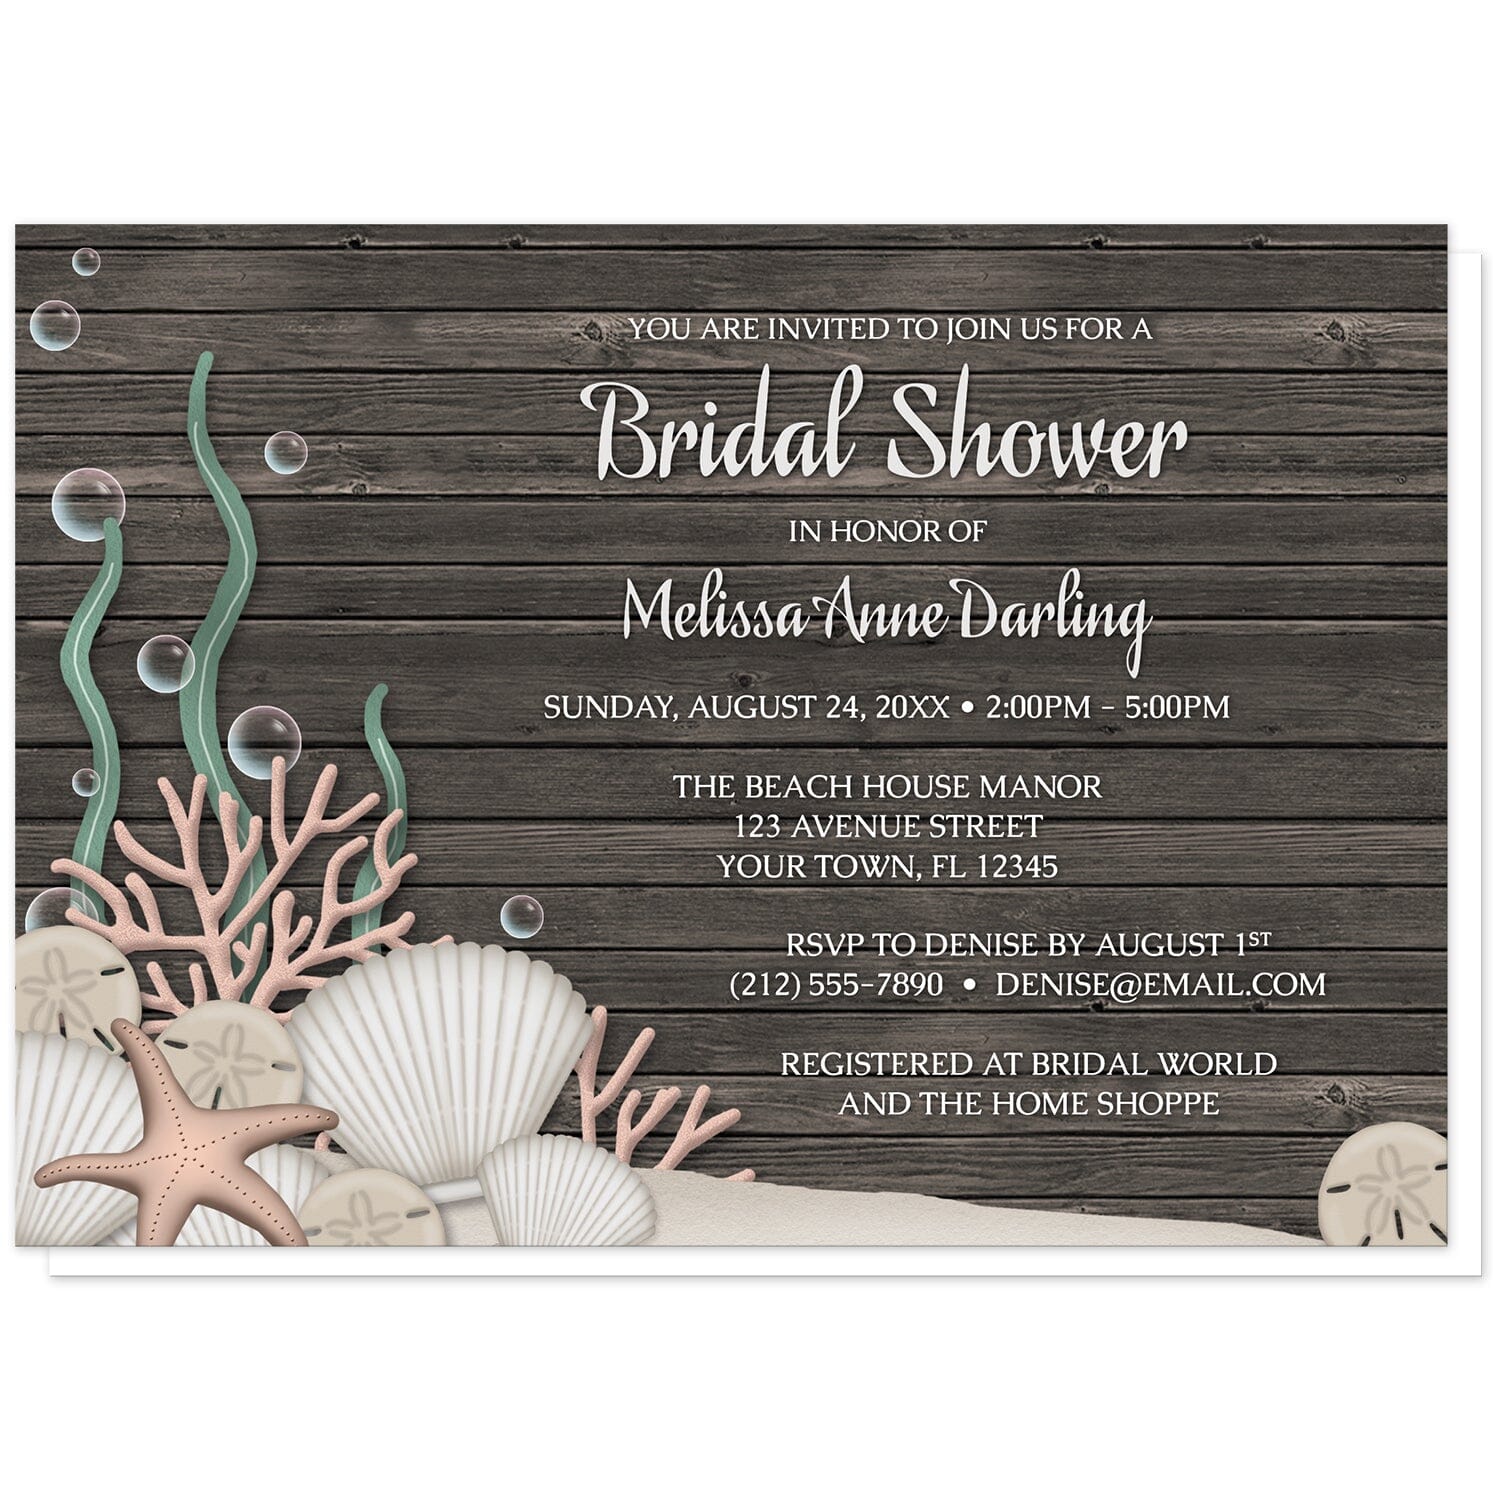 Rustic Beach Seashells and Wood Bridal Shower Invitations at Artistically Invited. Rustic beach seashells and wood bridal shower invitations with a rustic "on the beach" or "under the sea" theme. They are designed with a dark wood pattern, sandy seabed, assorted seashells, coral, and kelp. Your personalized bridal shower celebration details are custom printed in white over the wood background.